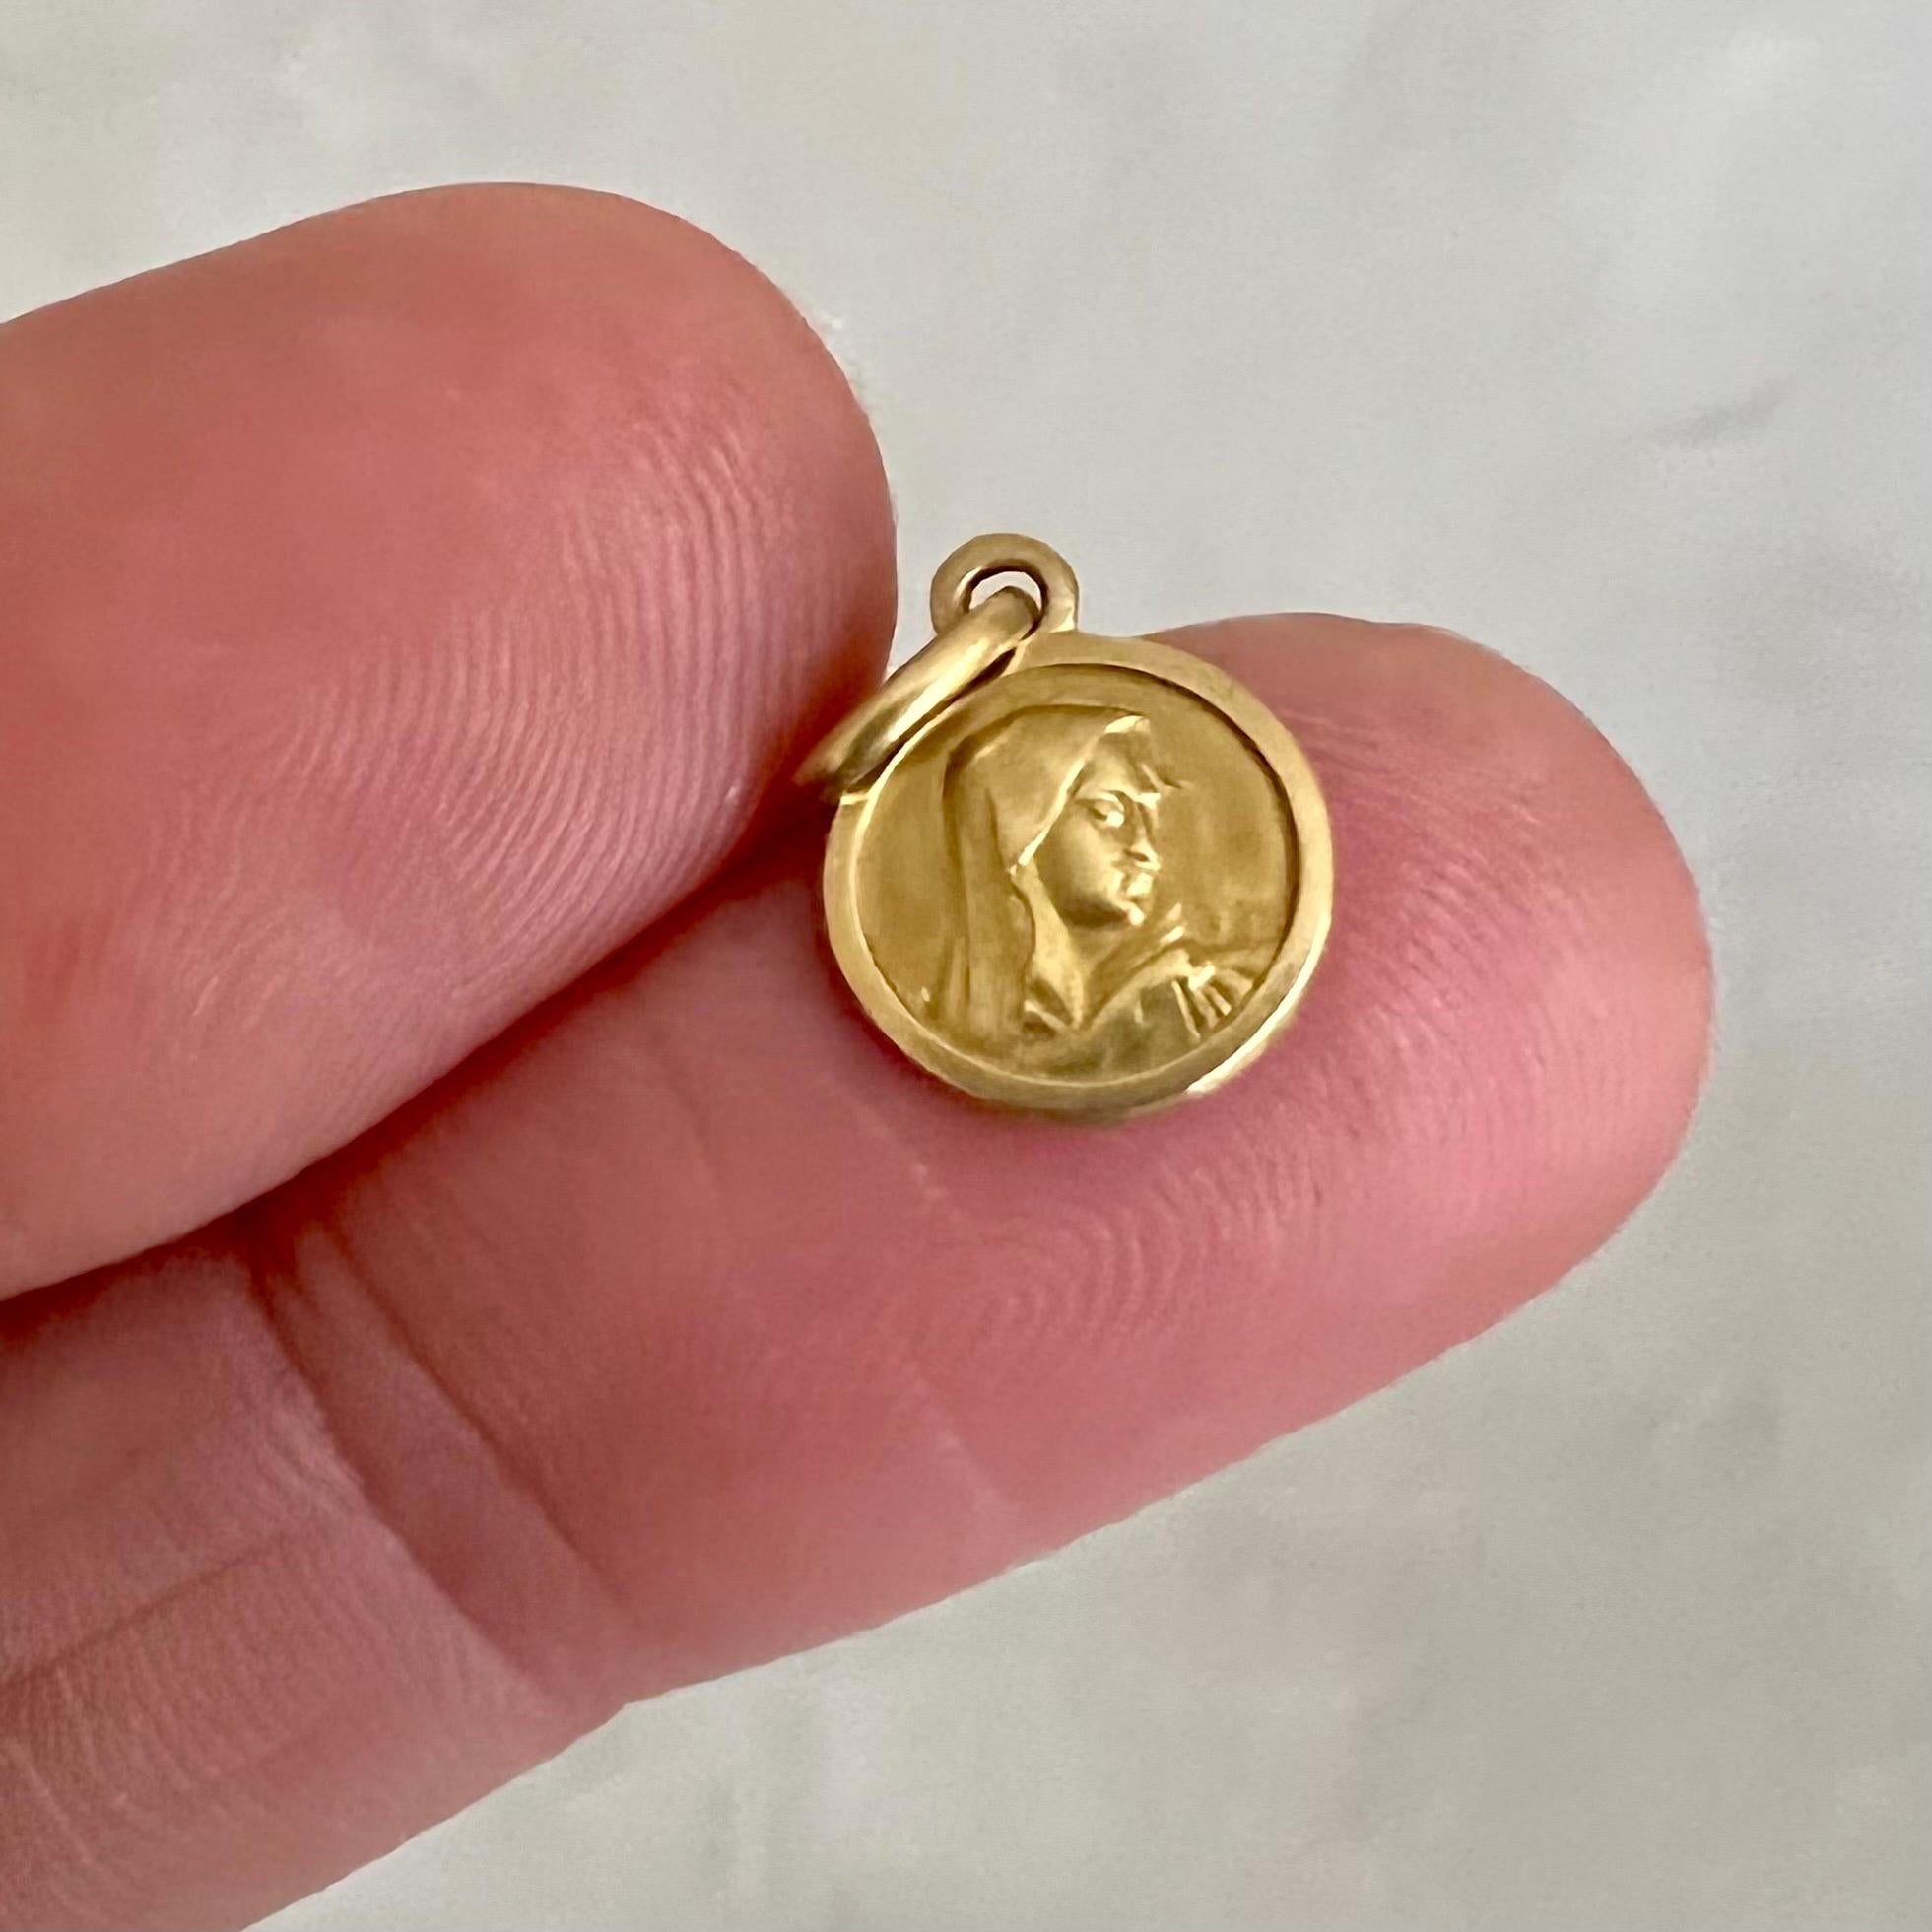 An Italian 18 karat gold Virgin Mary coin charm pendant. This 1950's small coin charm has a beautiful design with Virgin Mary depicted in relief in the middle. Charms are great to collect as wearable memories, it has a symbolic and often a